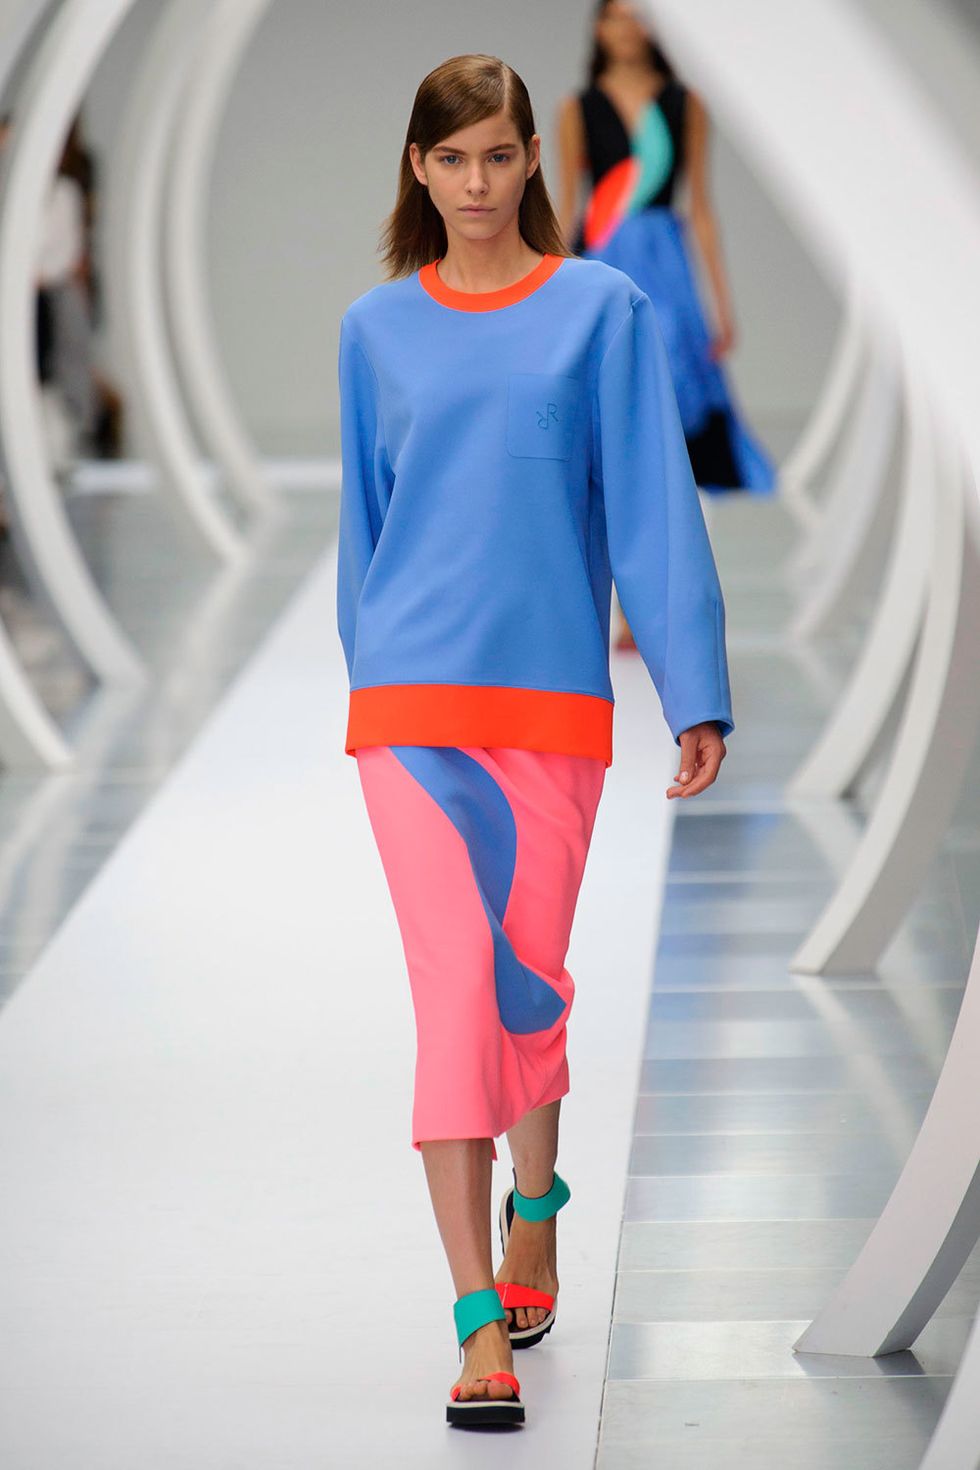 Blue, Sleeve, Shoulder, Human leg, Joint, Red, Fashion show, Style, Fashion model, Electric blue, 